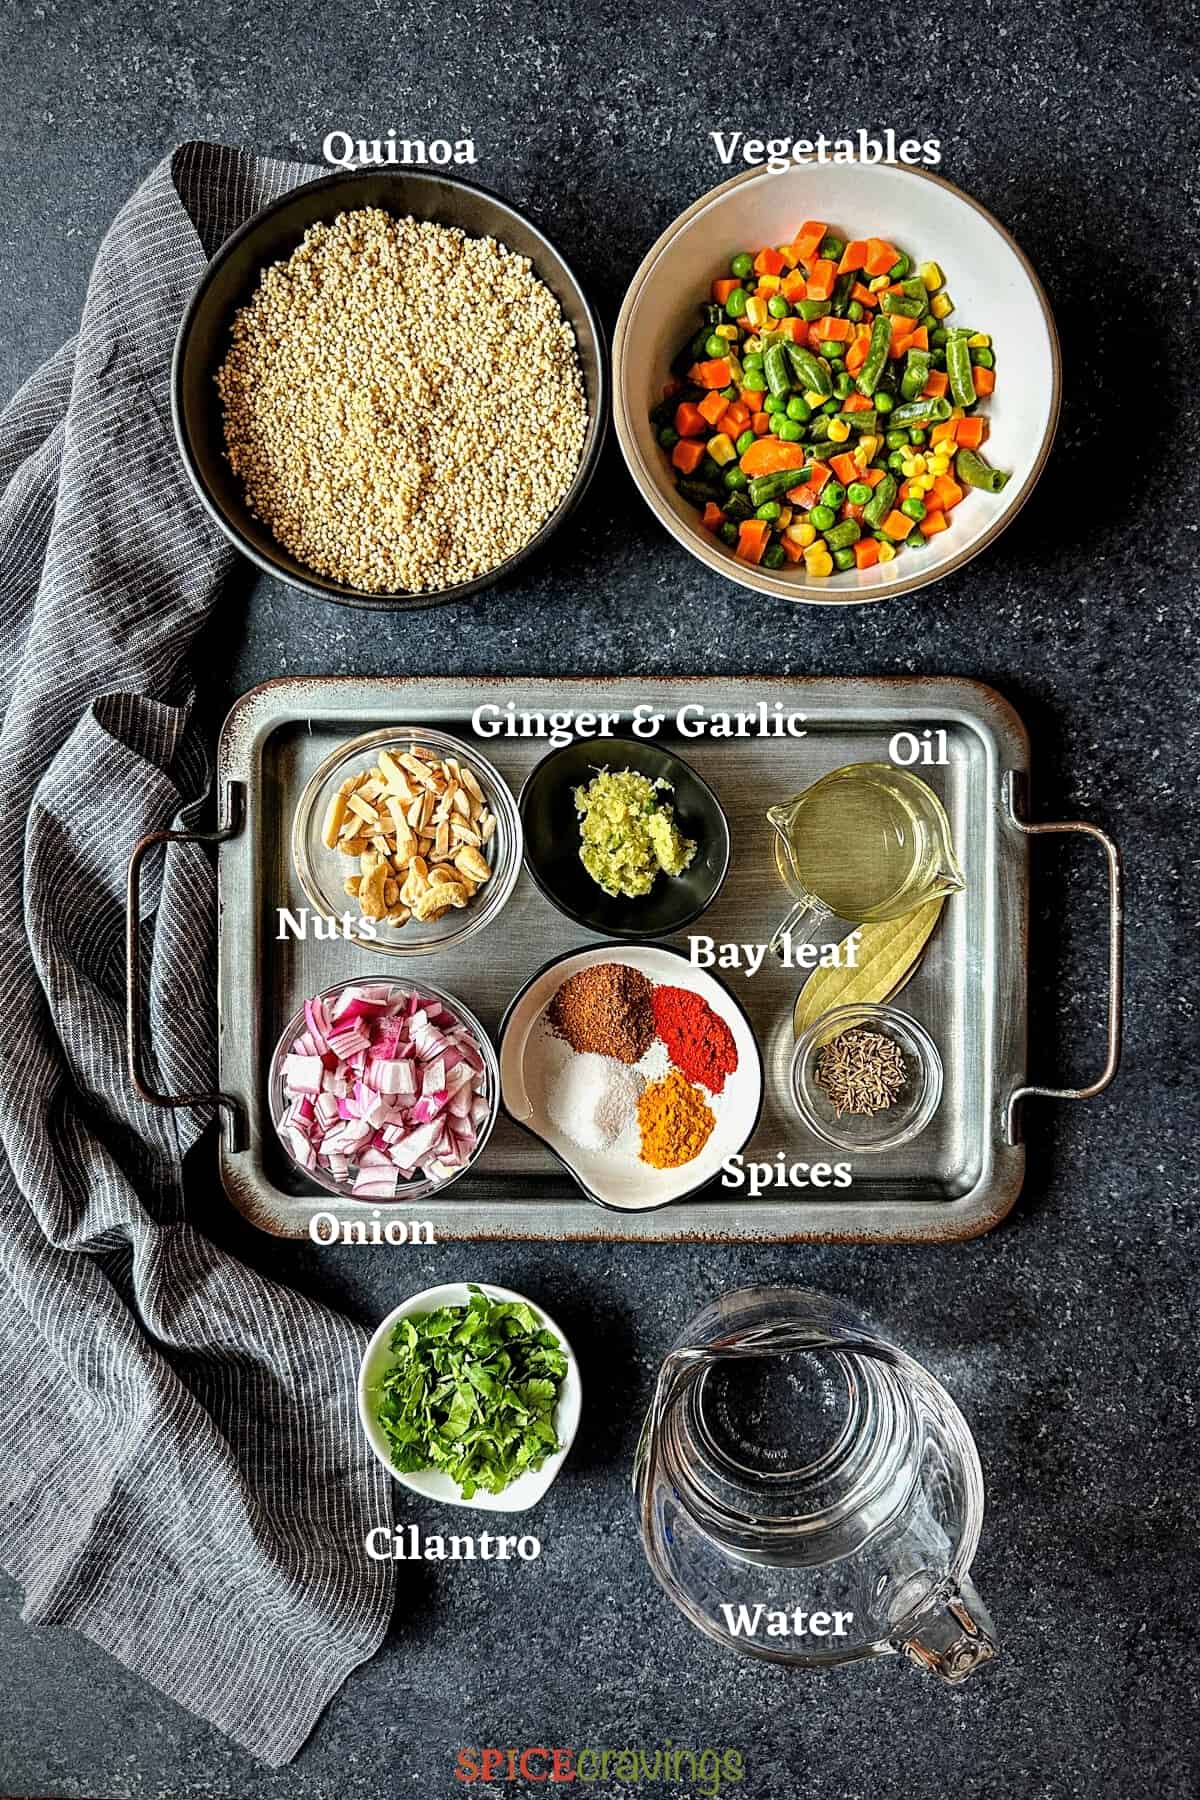 frozen vegetables, quinoa, water, nuts among other ingredients spread on a grey board